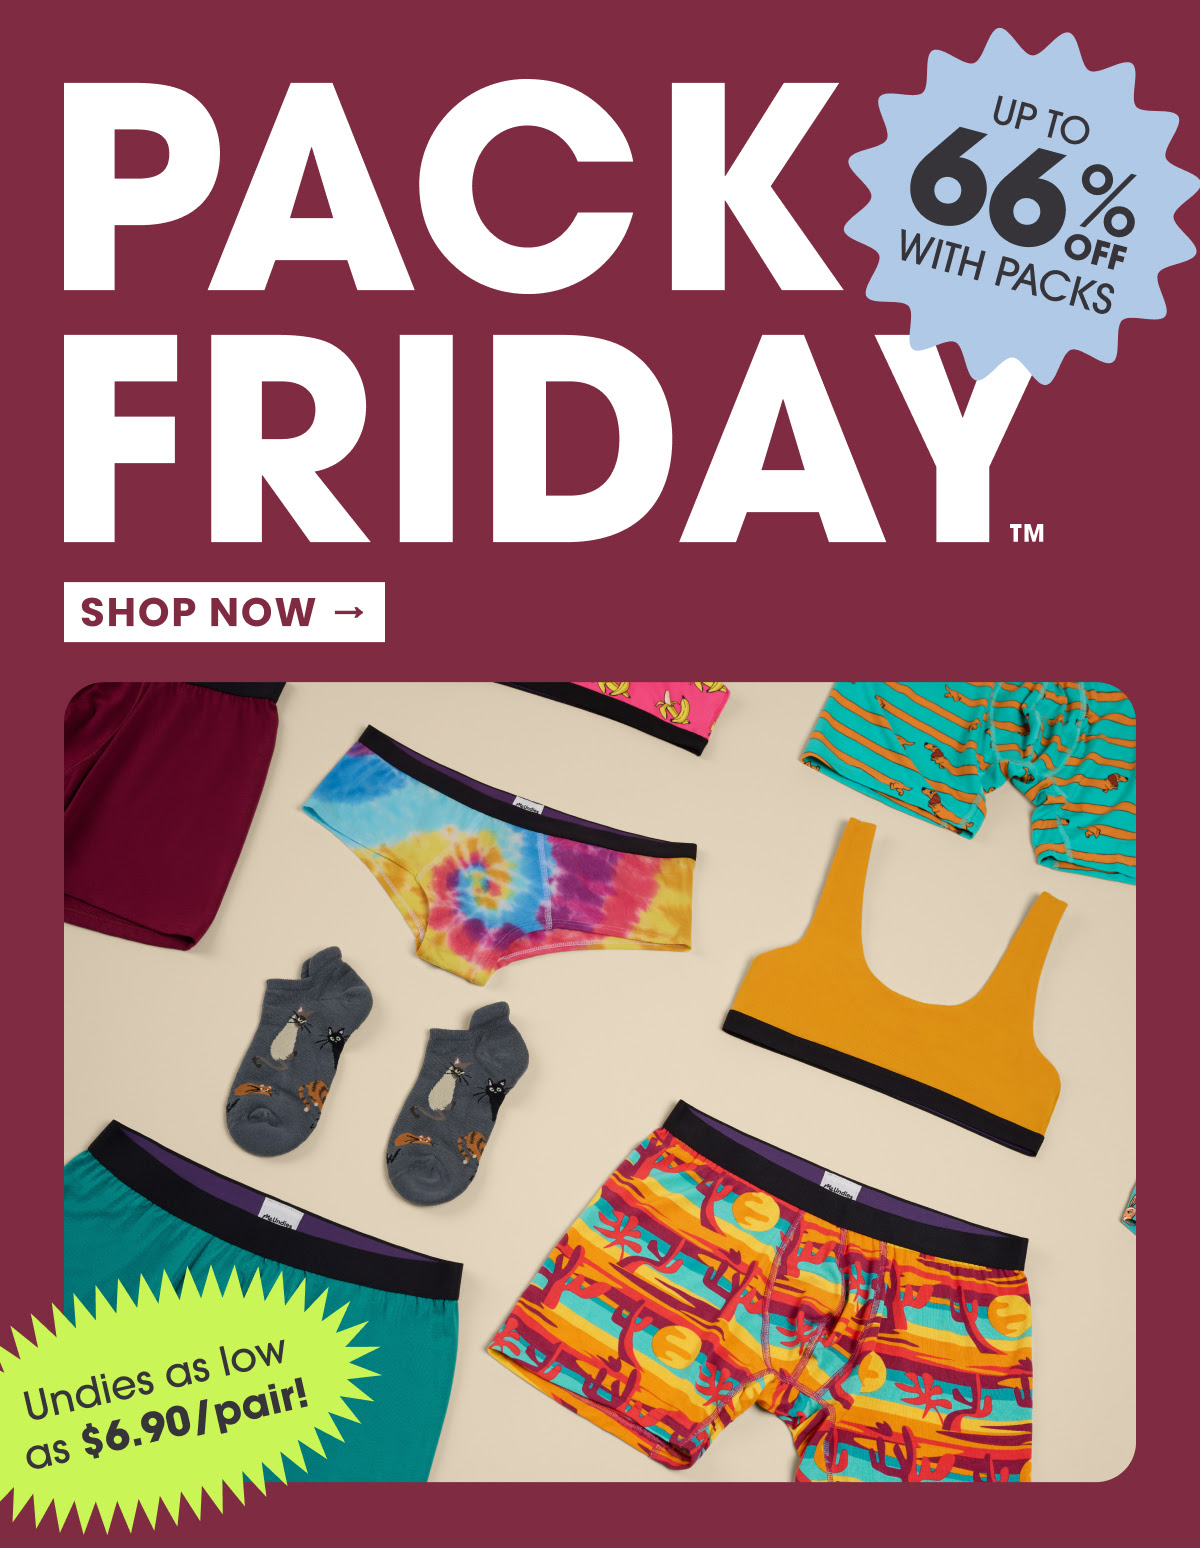 MeUndies Black Friday Deal: Up to 66% Off on Mystery Packs